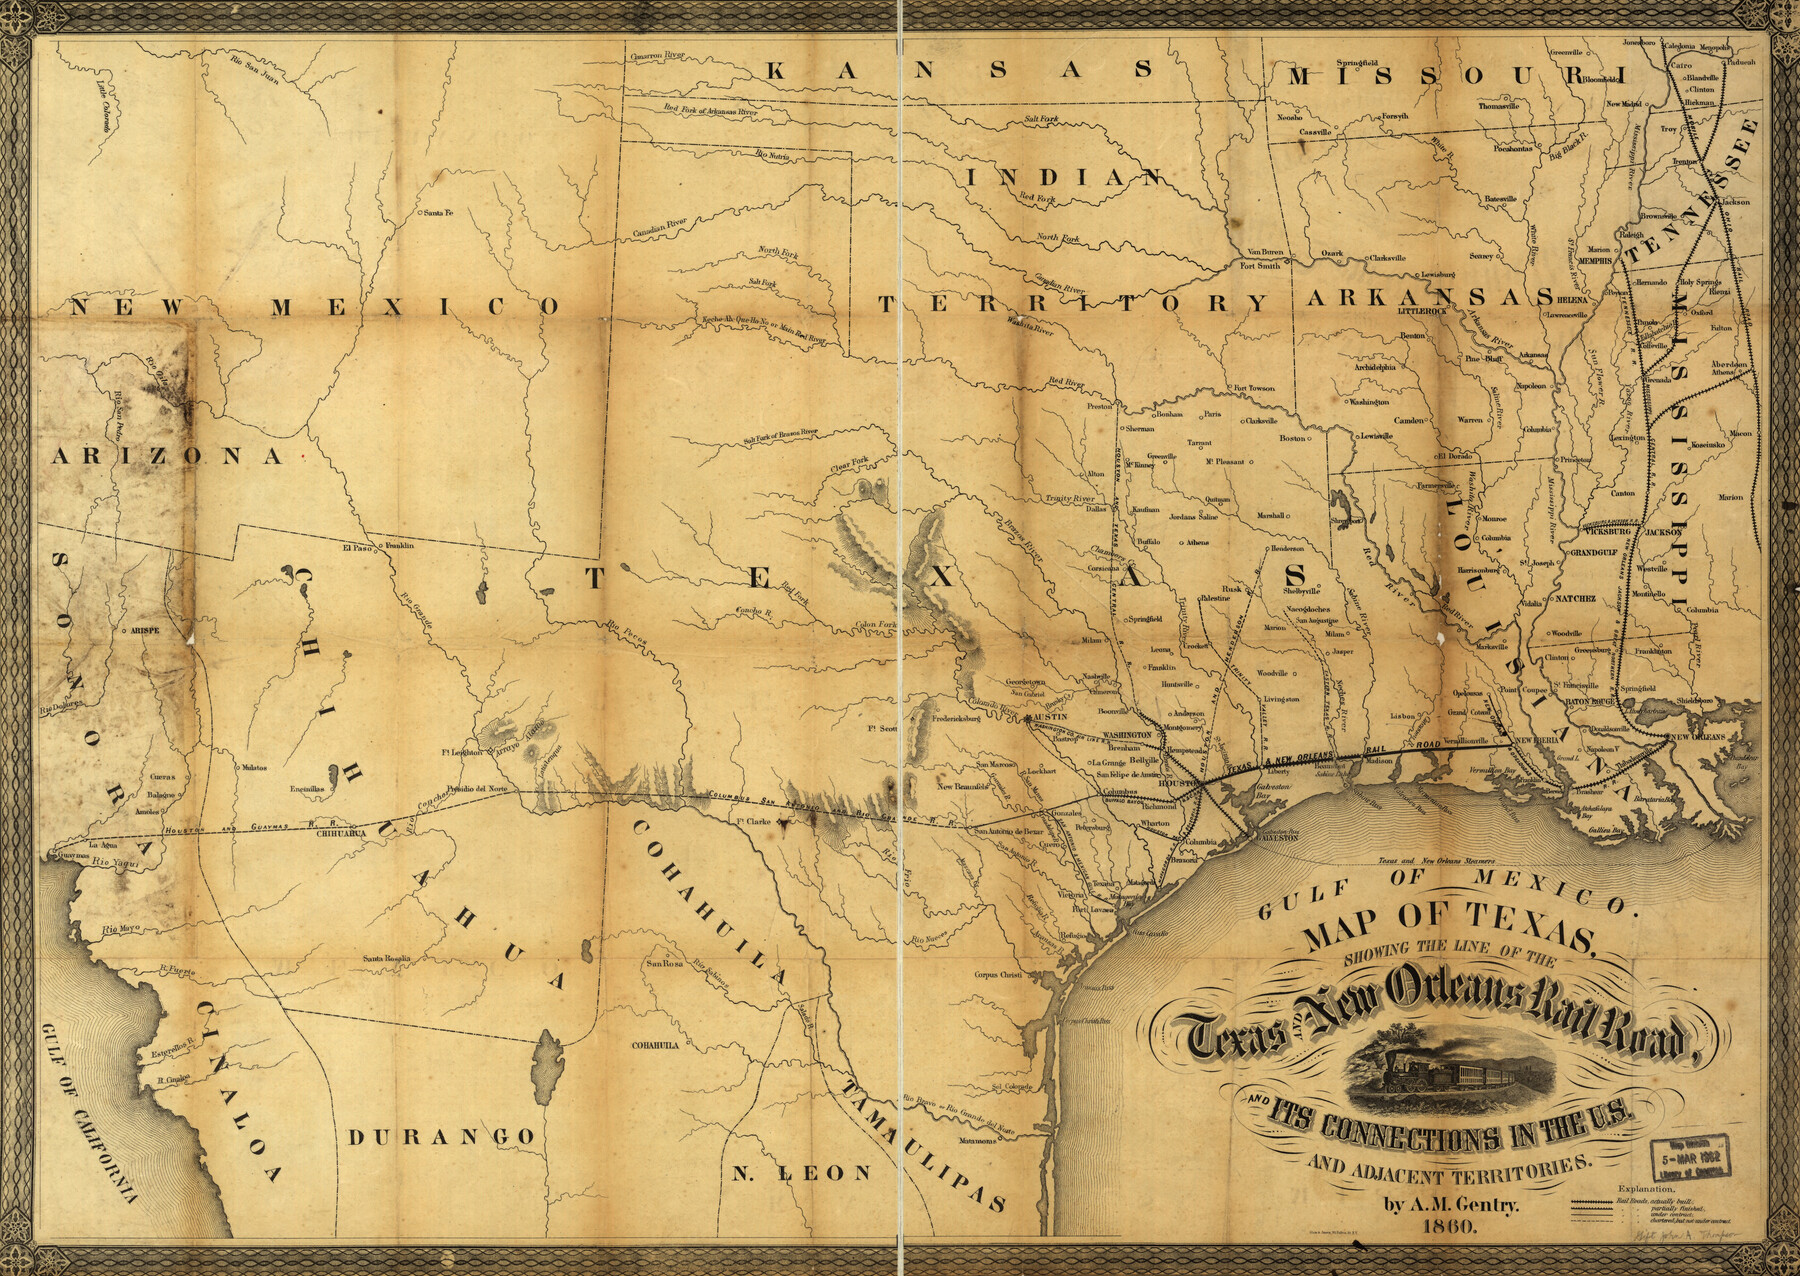 93612, Map of Texas, showing the line of the Texas and New Orleans Rail Road, and its connections in the U.S. and adjacent territories., Library of Congress